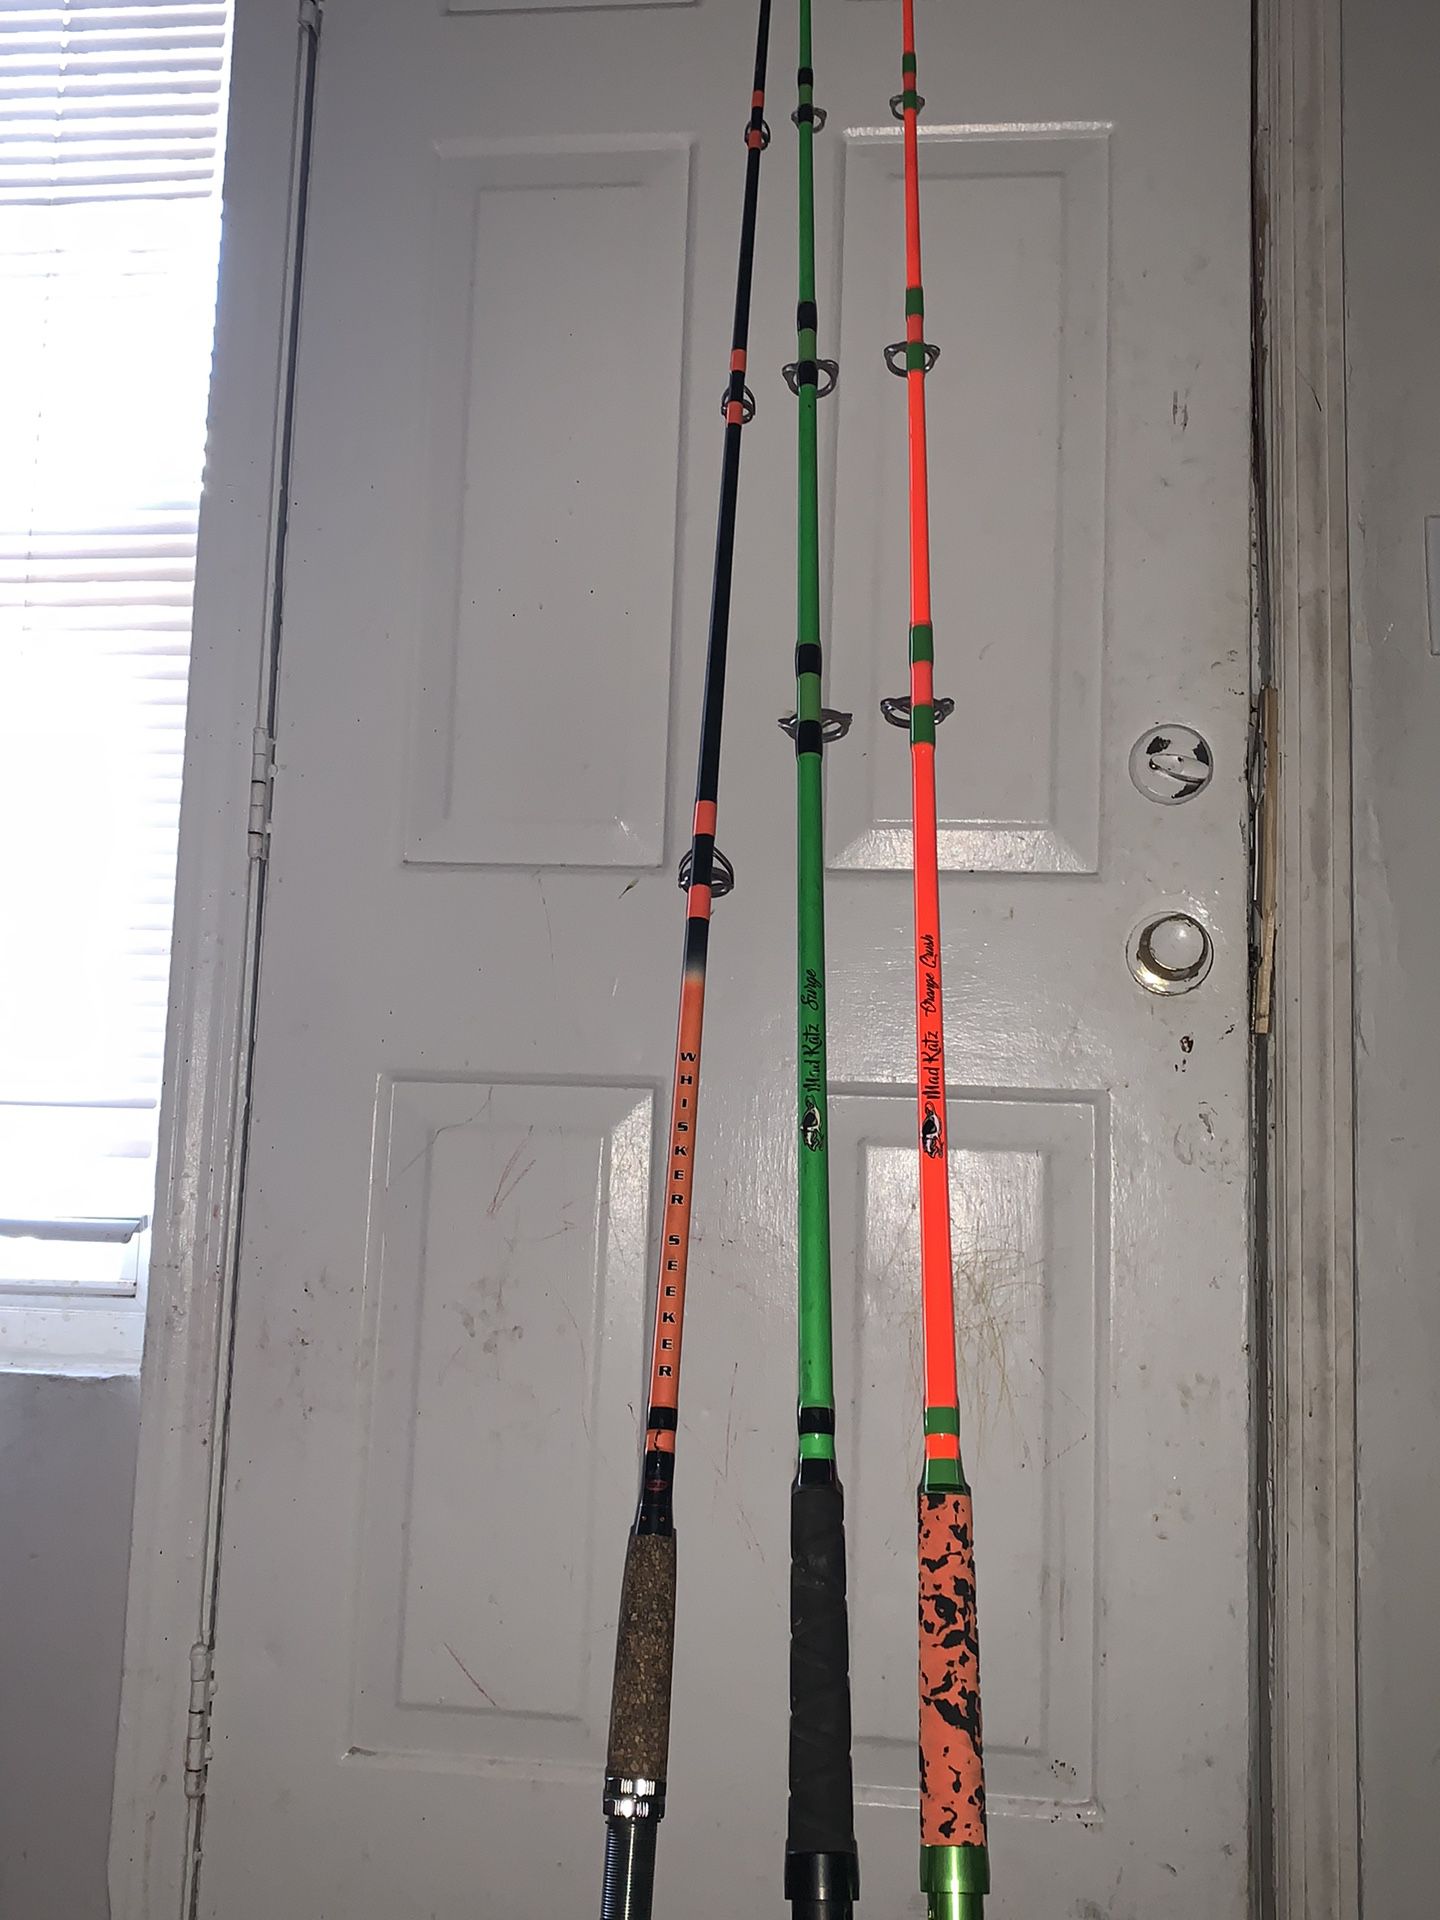 2 Madkatz Rods That Glow With Black Light 1 Fmj Whisker Seeker Rod